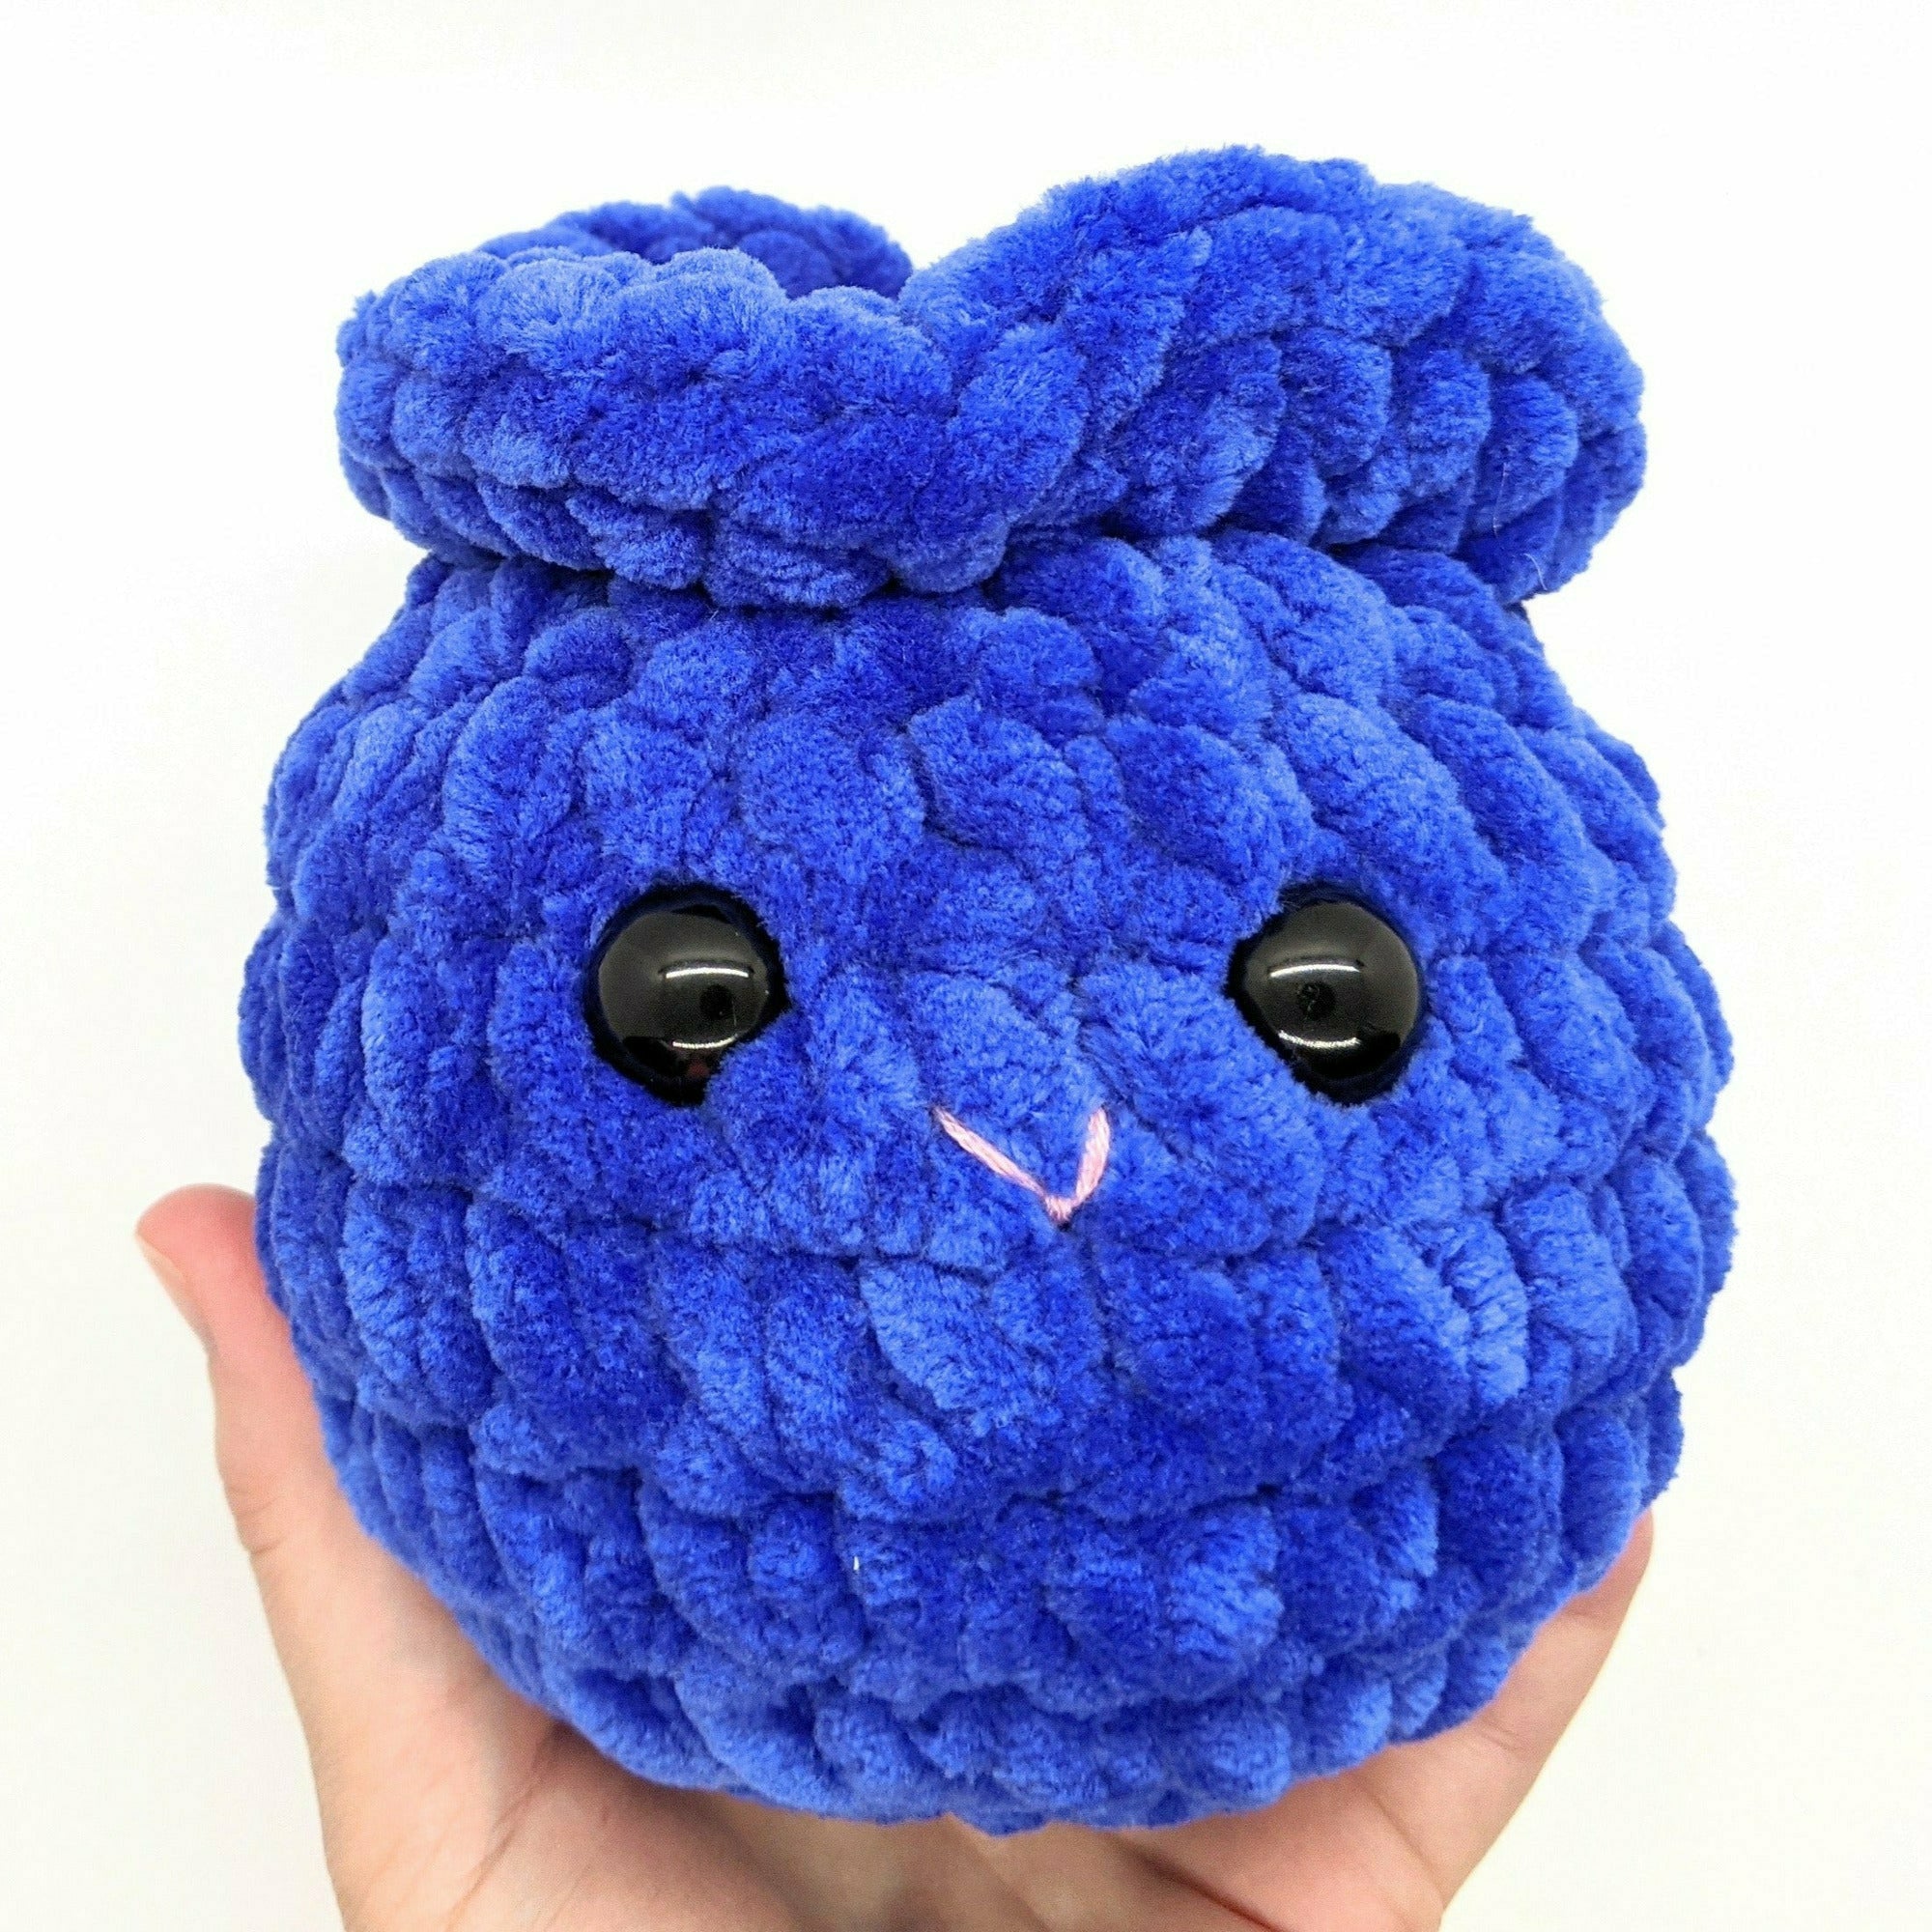 Giant Crochet Blueberry Snow Cone - Fairfield World Craft Projects